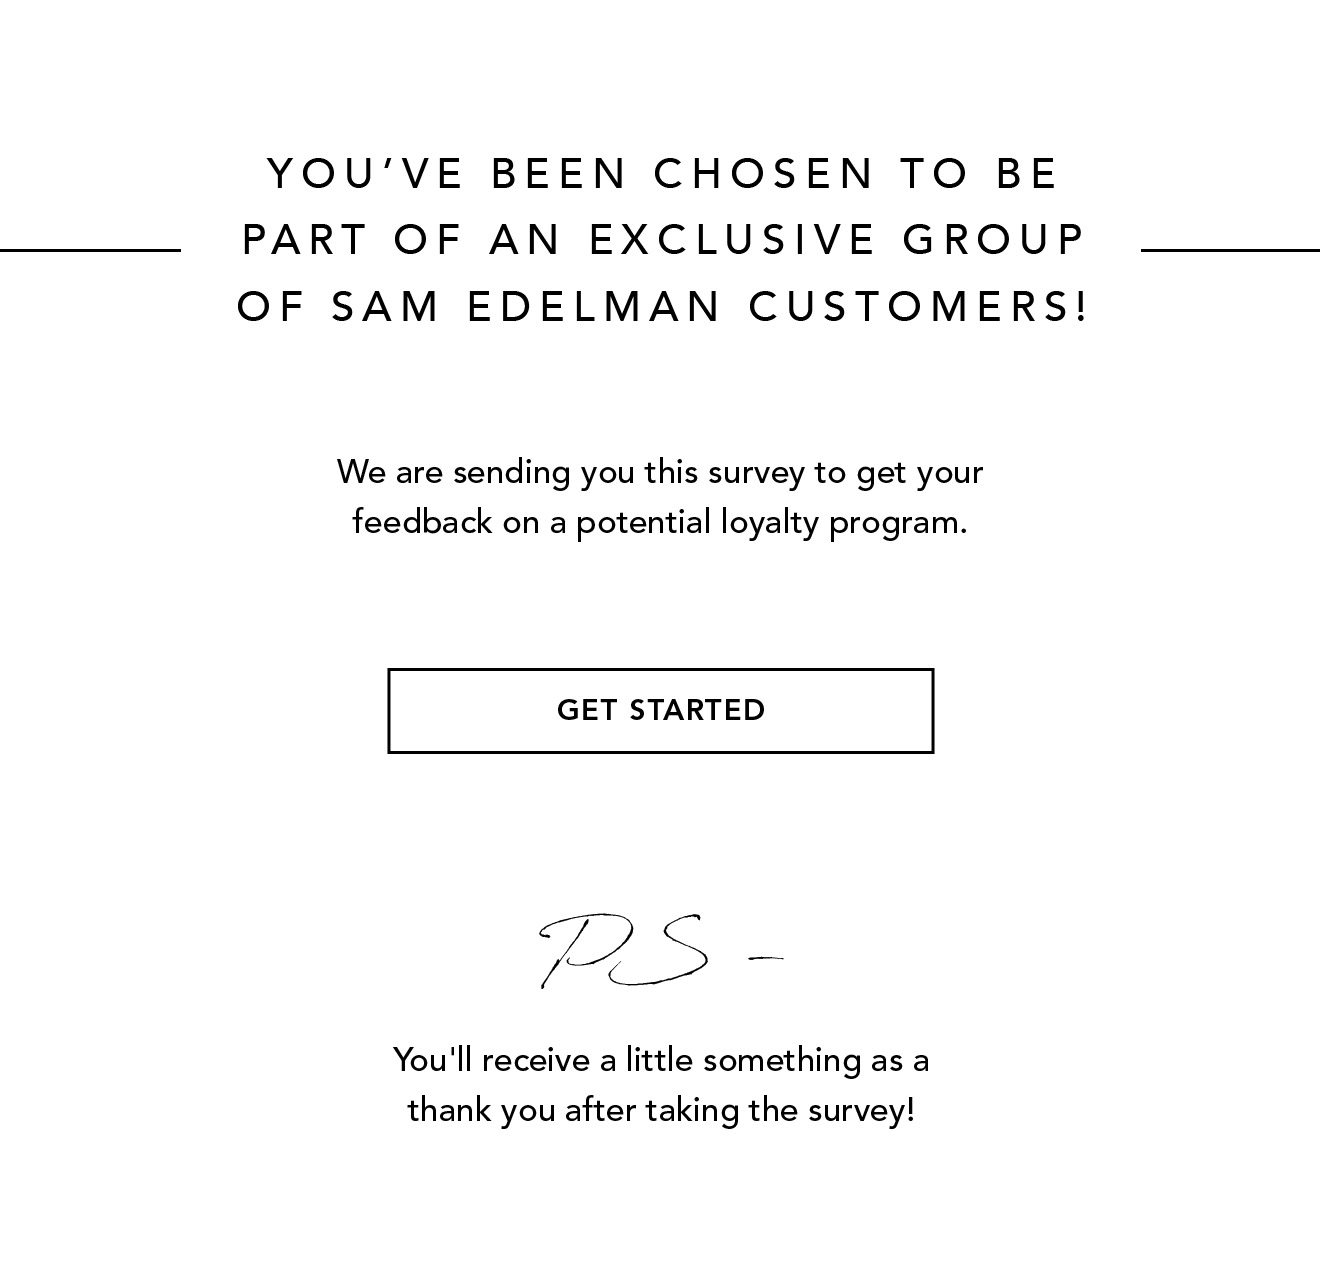 You've been chosen to be part an exclusive group of customers! - Get Started